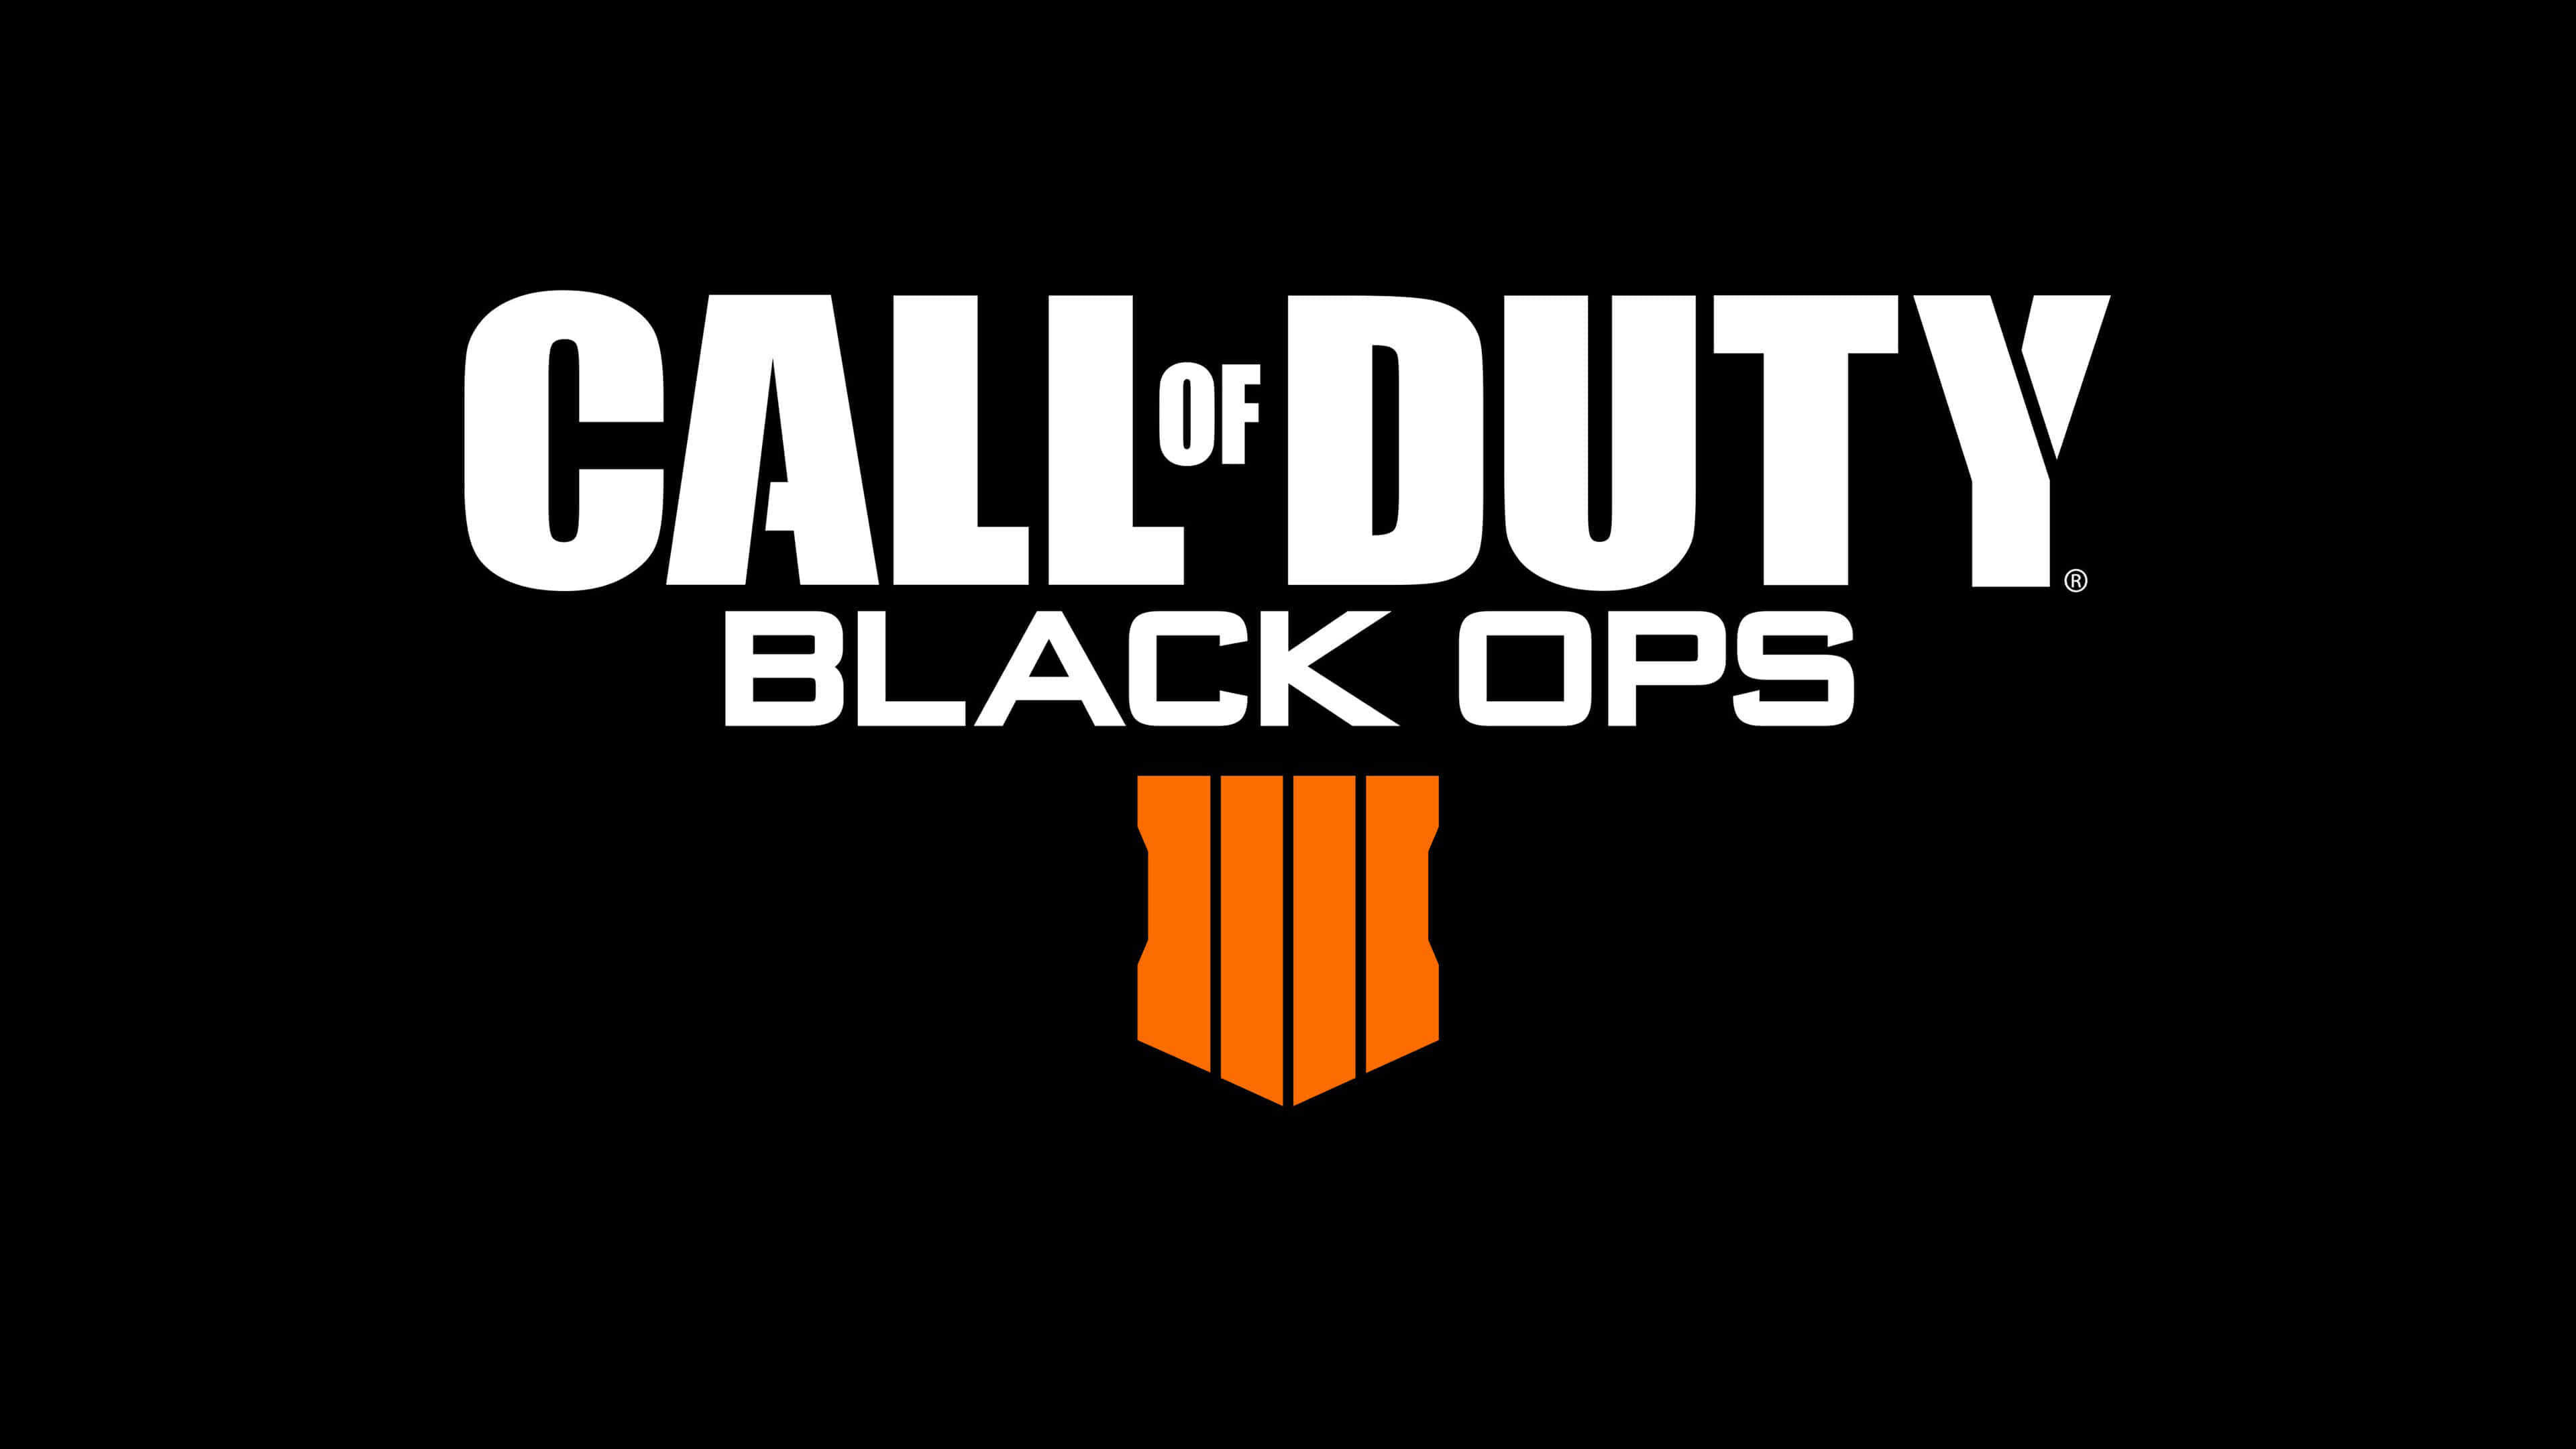 Call of Duty: CoD Black Ops 4, Developed by Treyarch and published by Activision. 3840x2160 4K Background.